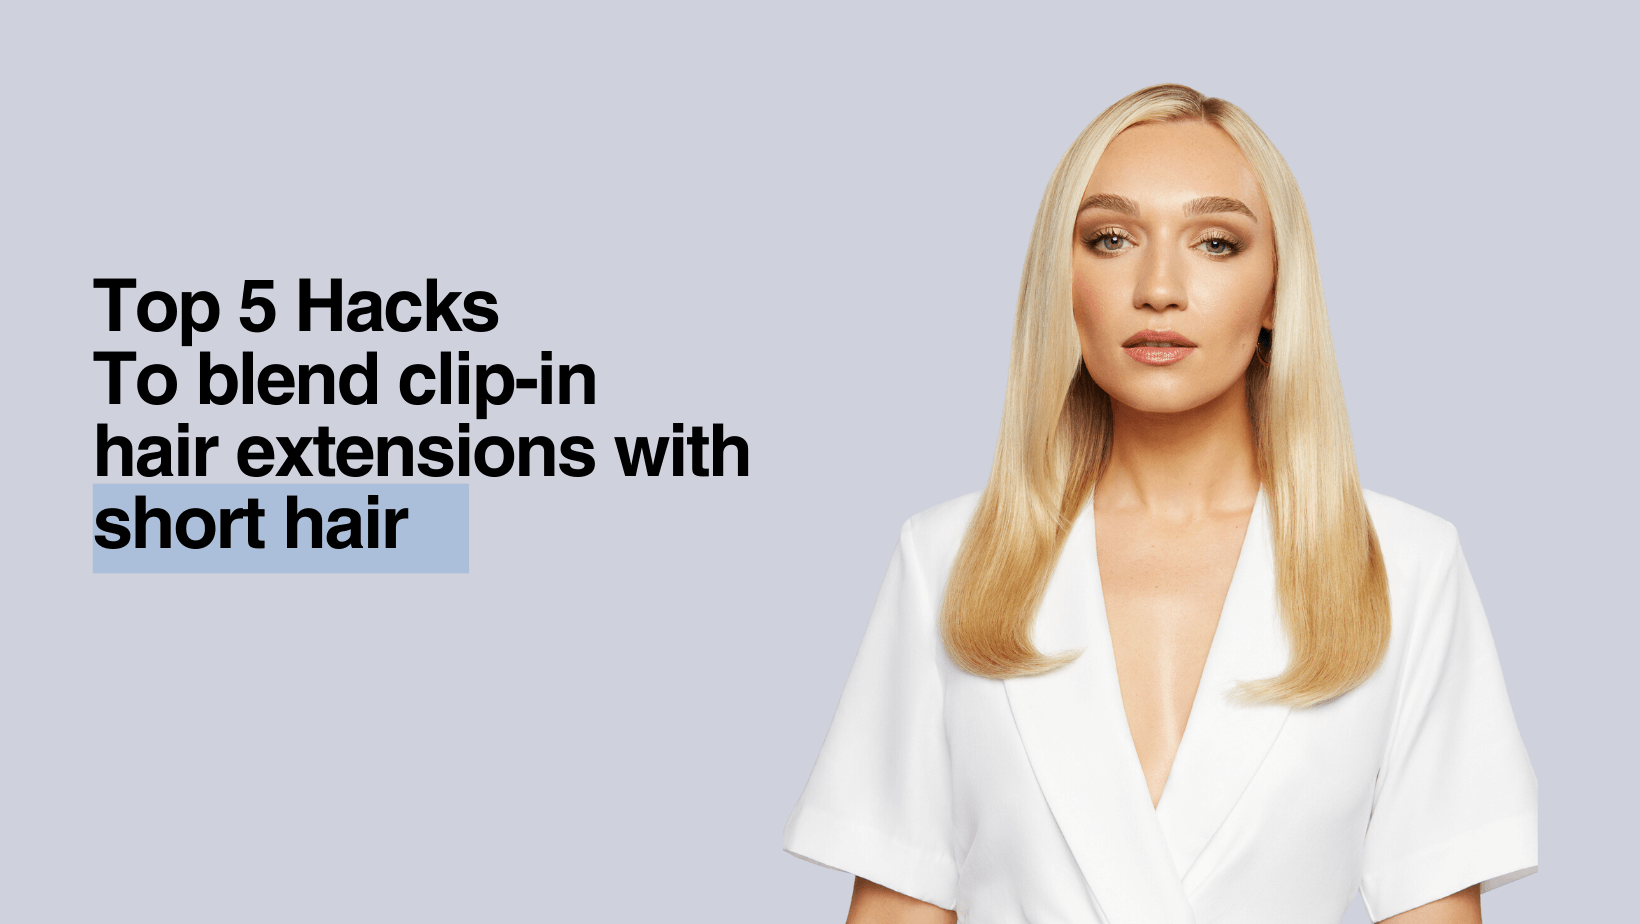 Top 5 Hacks To Blend Clip In Hair Extensions with Short Hair